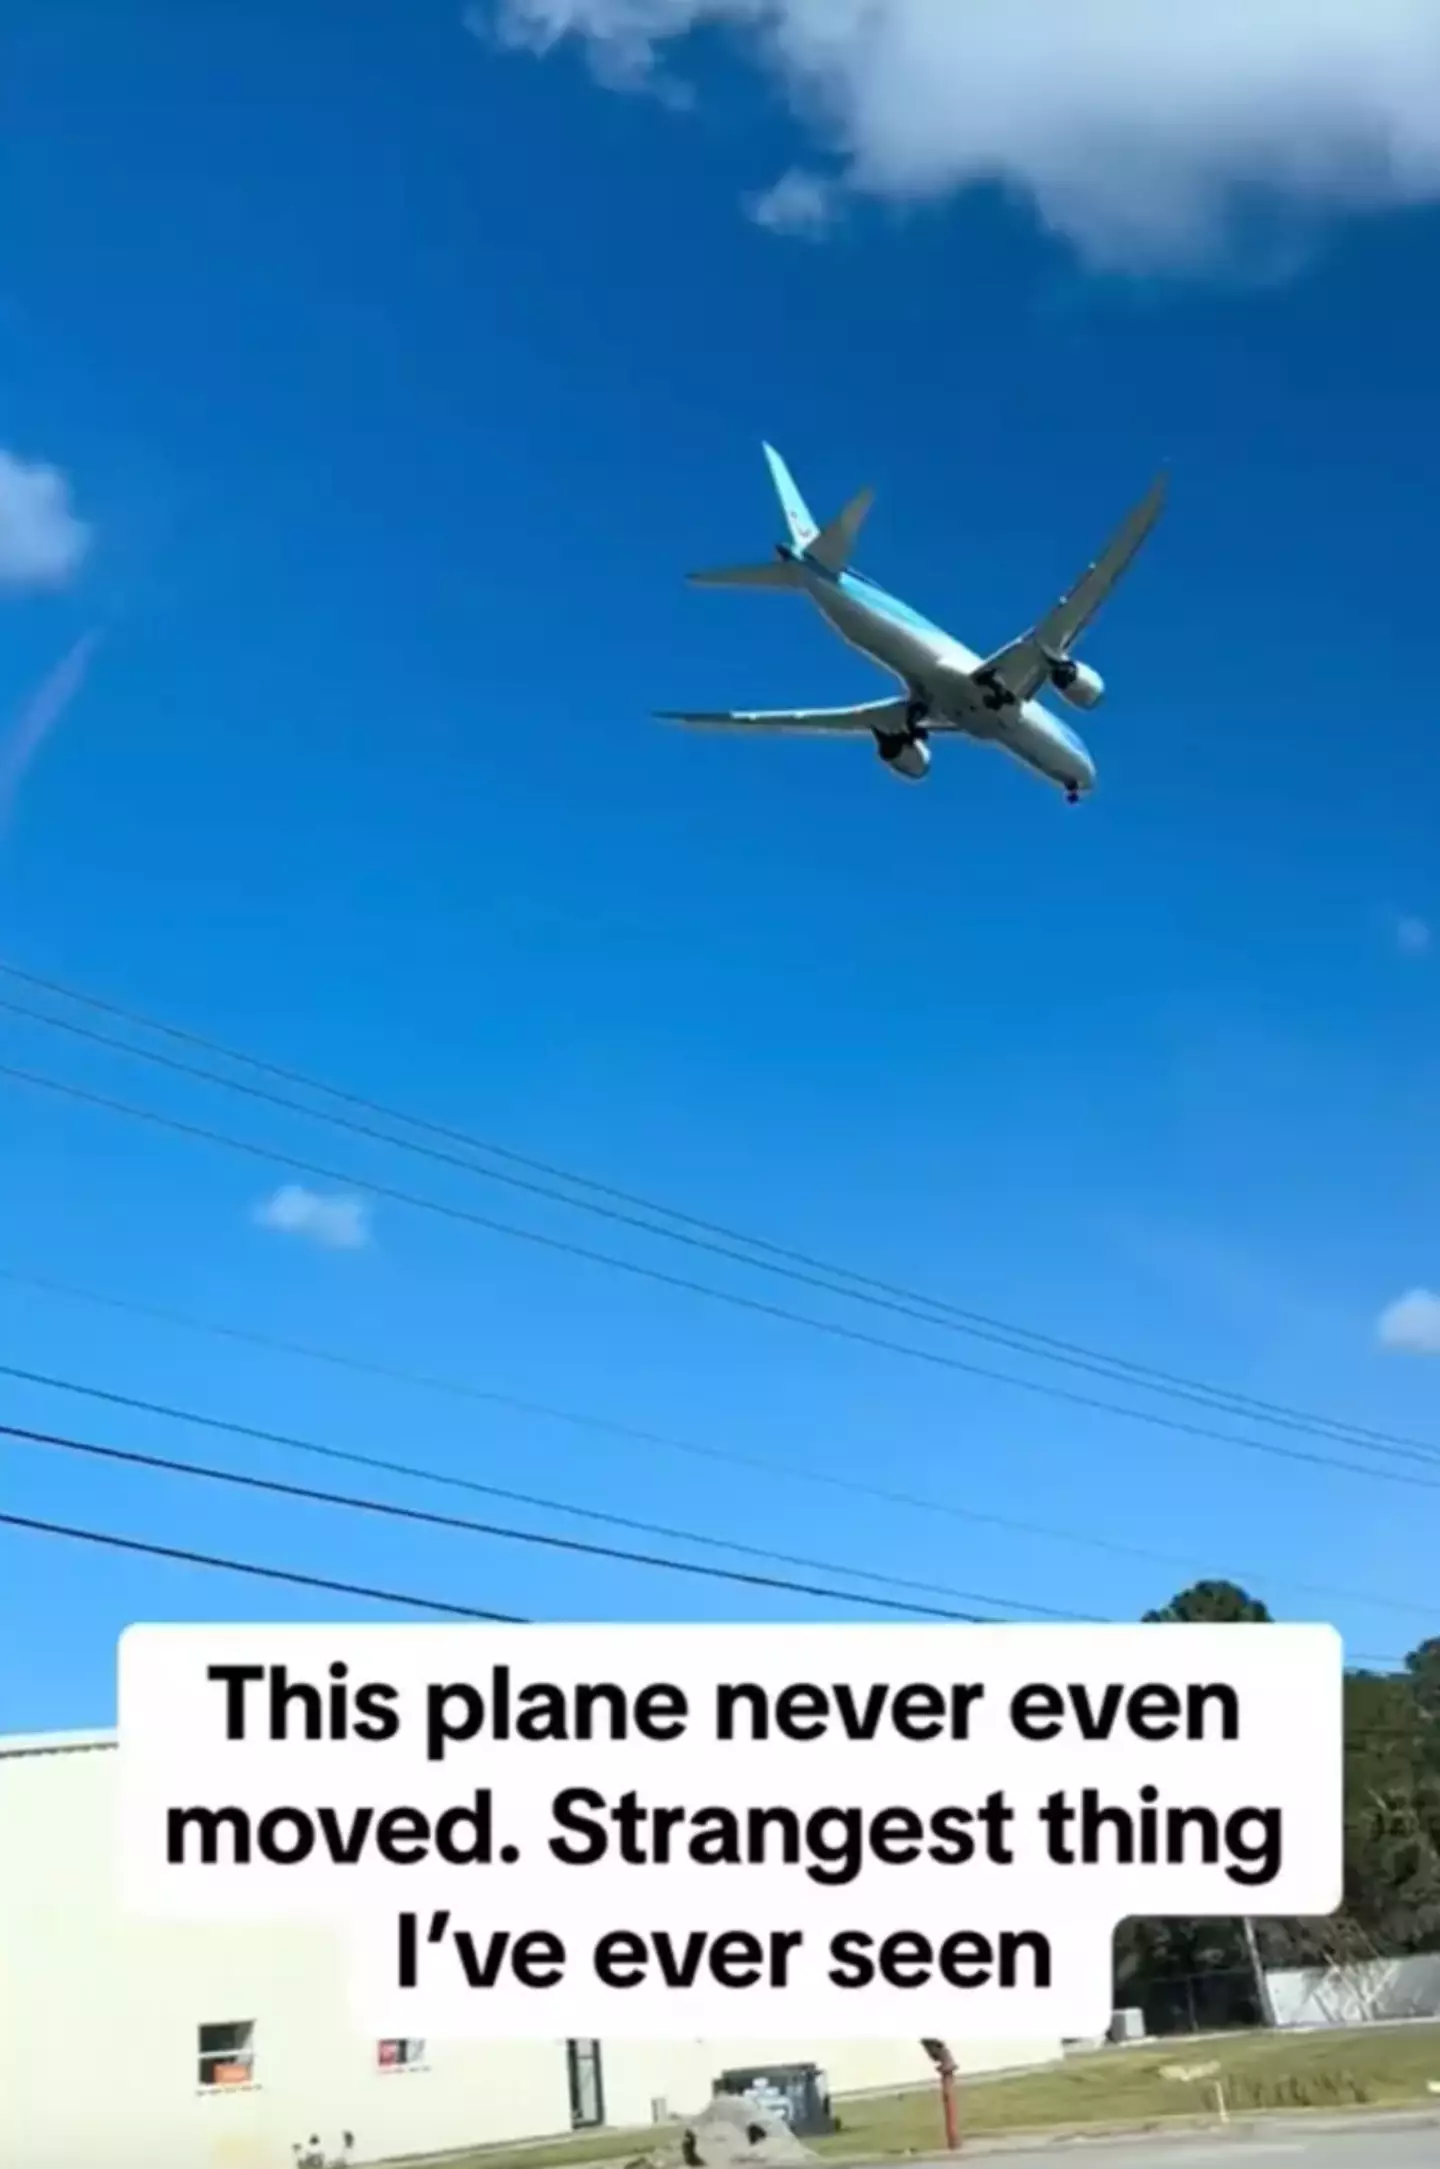 Even as the TikToker drives past, the plane doesn't seem to budge.